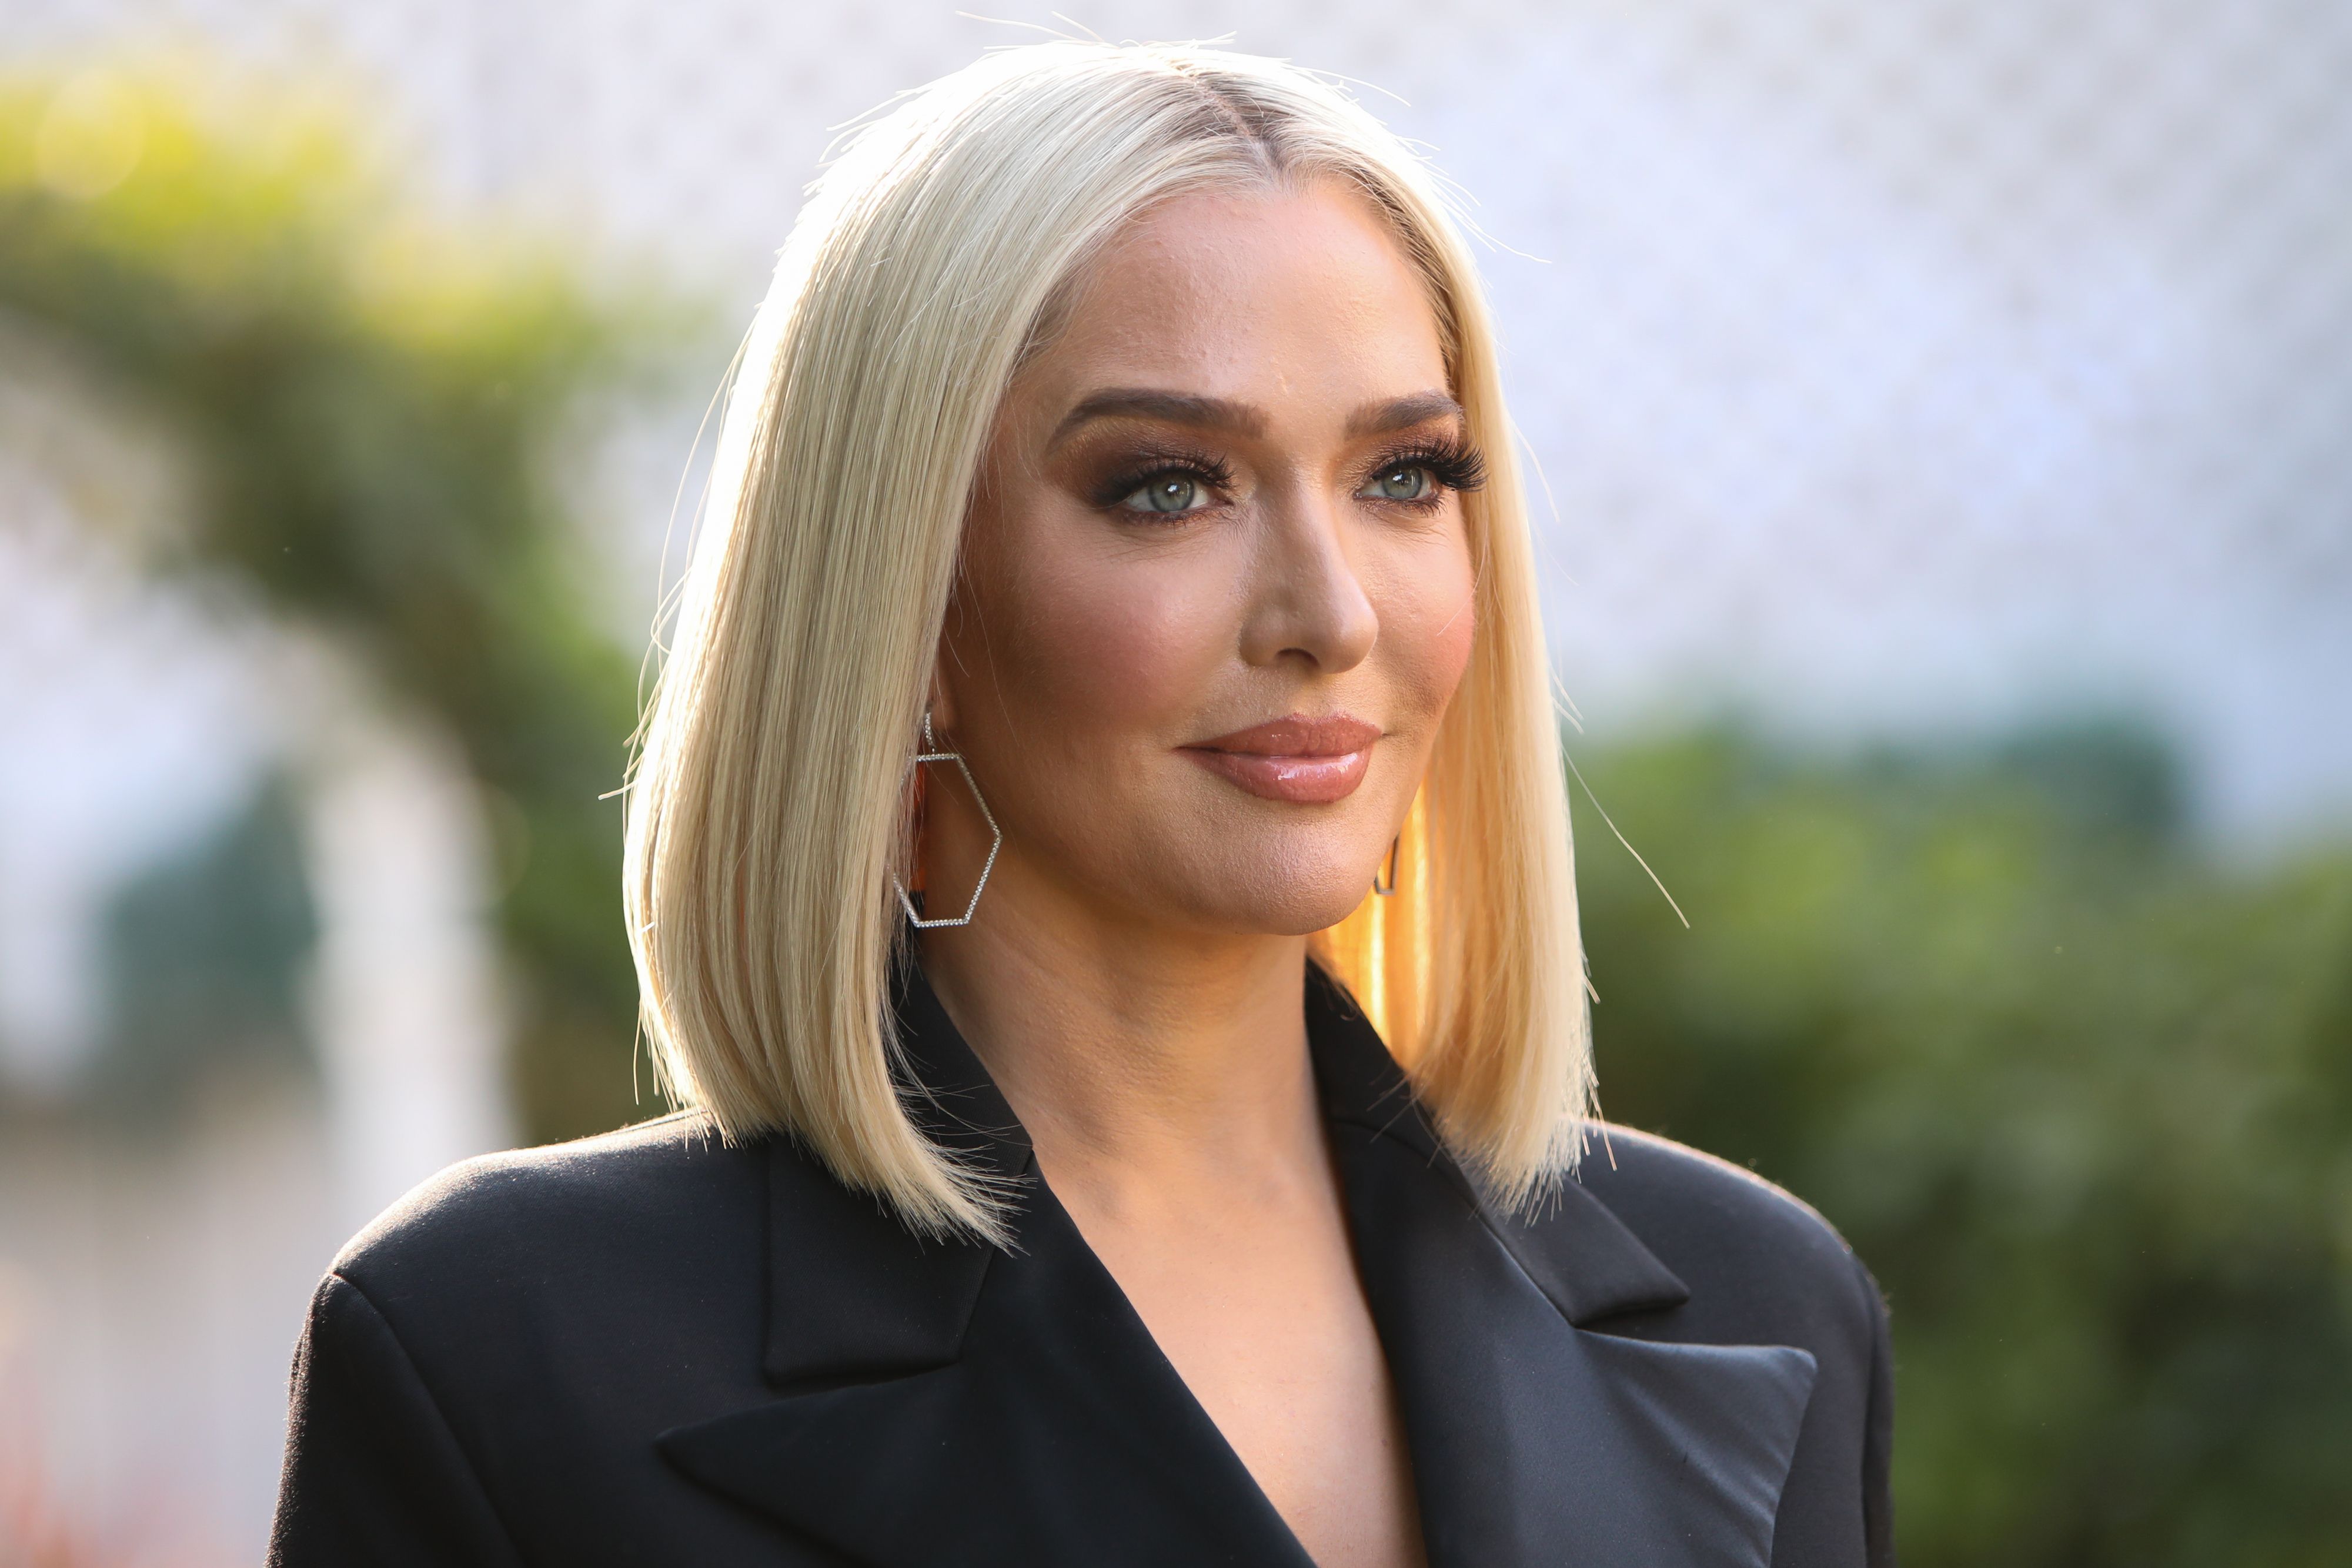 Erika Jayne at Hallmark Channel's "Home & Family" at Universal Studios in Hollywood in 2019 | Source: Getty Images